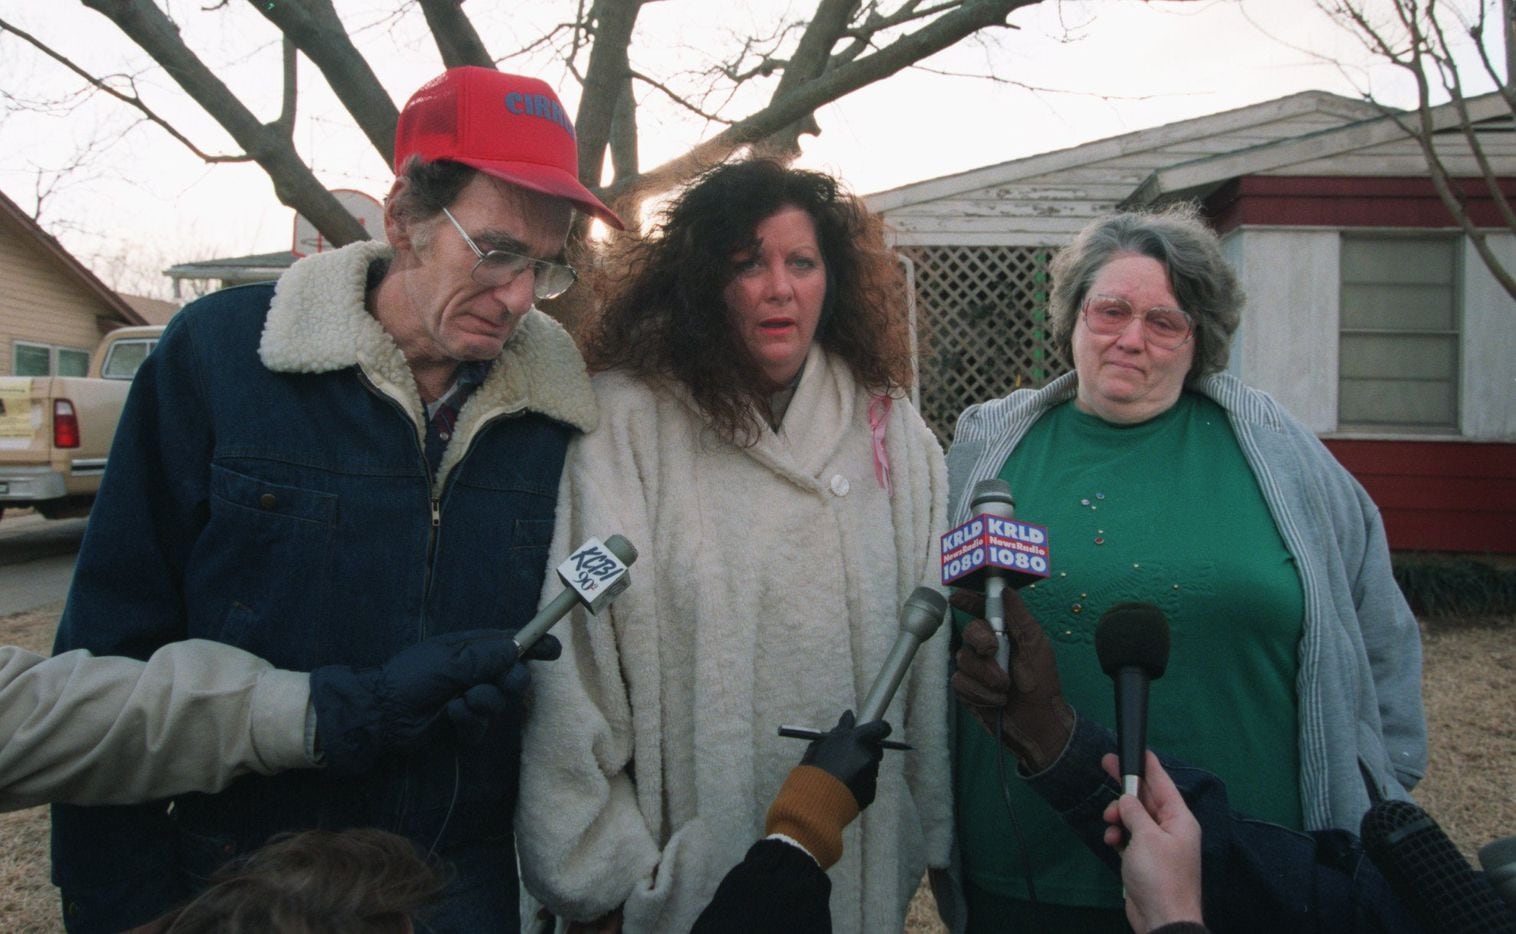 Jimmie Whitson,  Amber's grandfather, Phyllis Stephens, a family friend, and Glenda  Whitson, Amber's grandmother, spoke to the news media in front  her the Whitson's home early Thursday morning, Jan. 18, 1996.